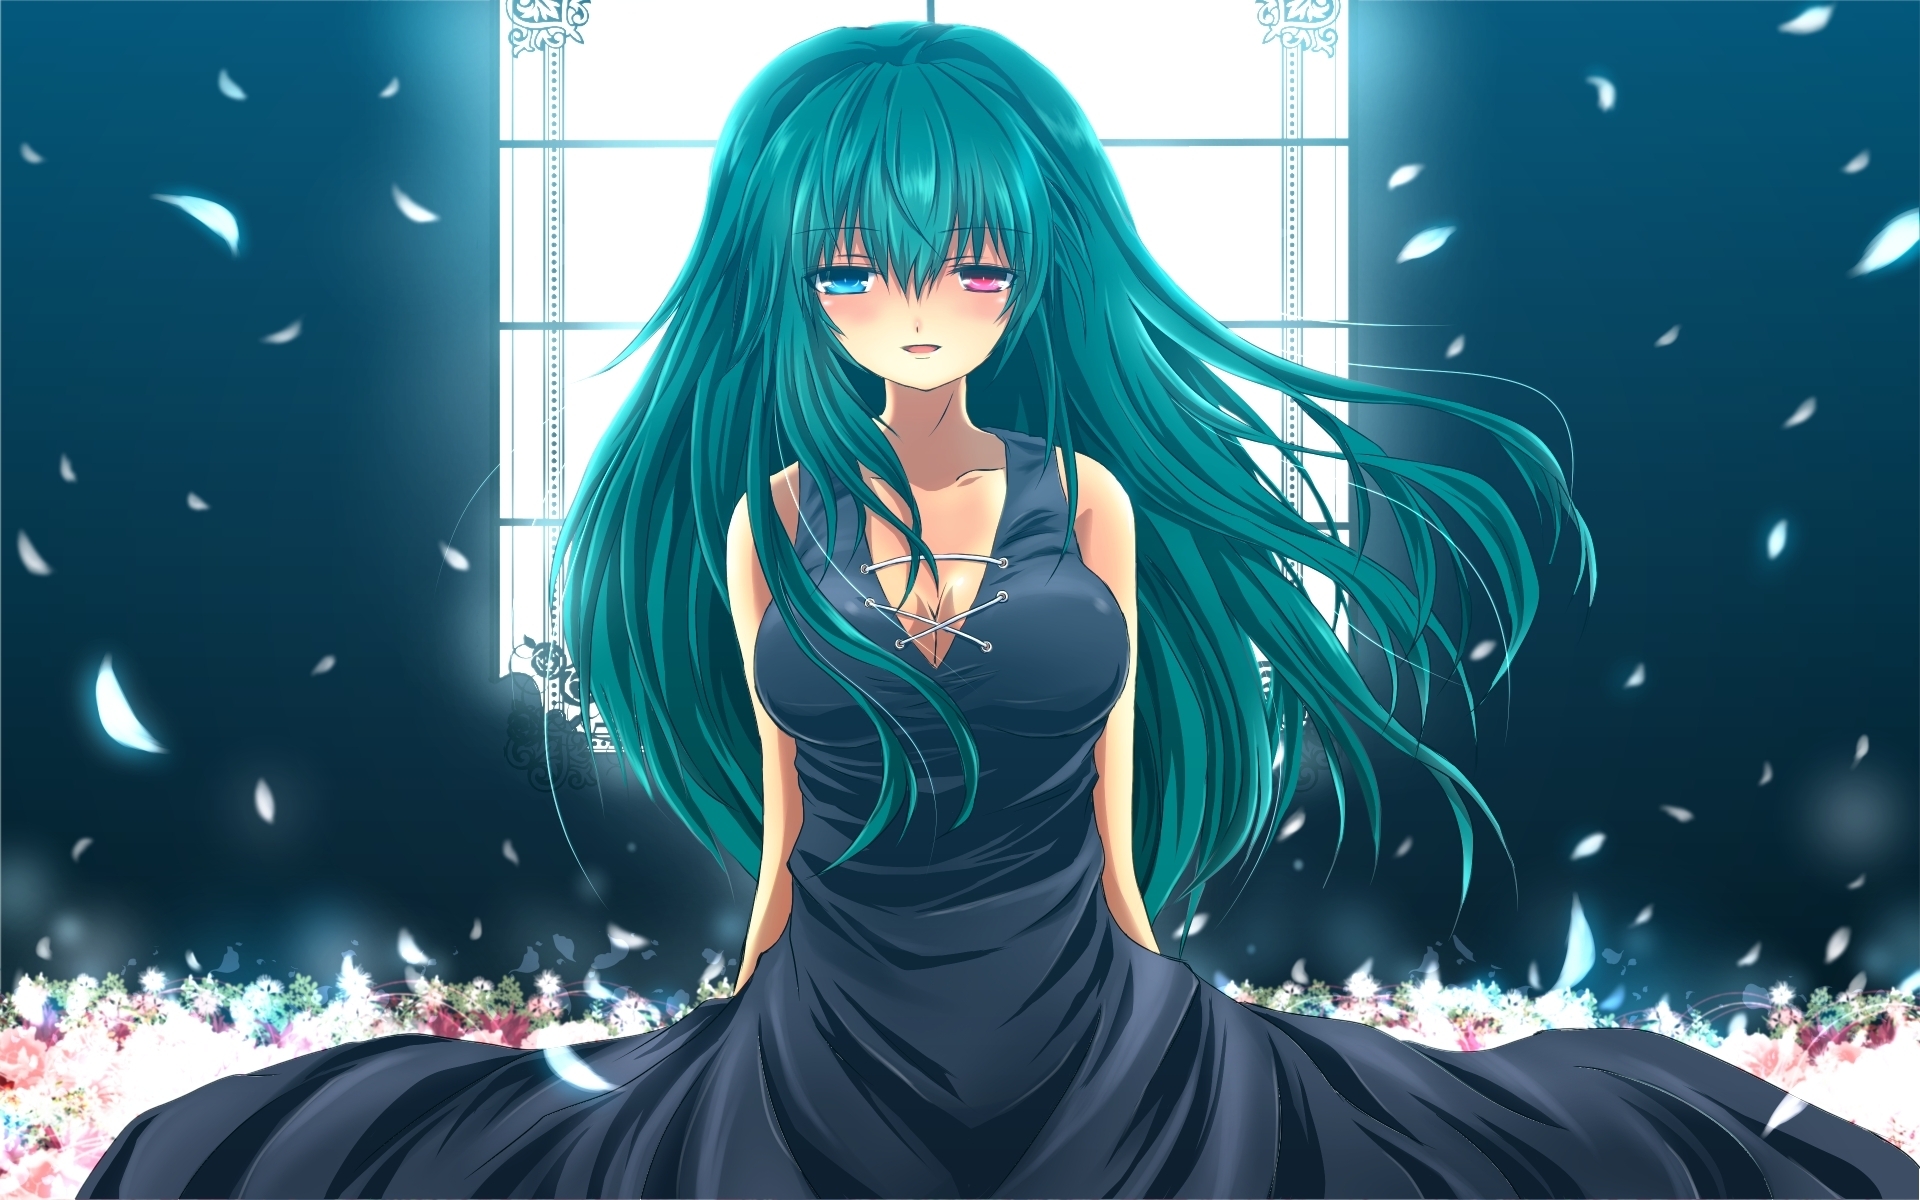 Blue-haired anime girl in prom dress - wide 4